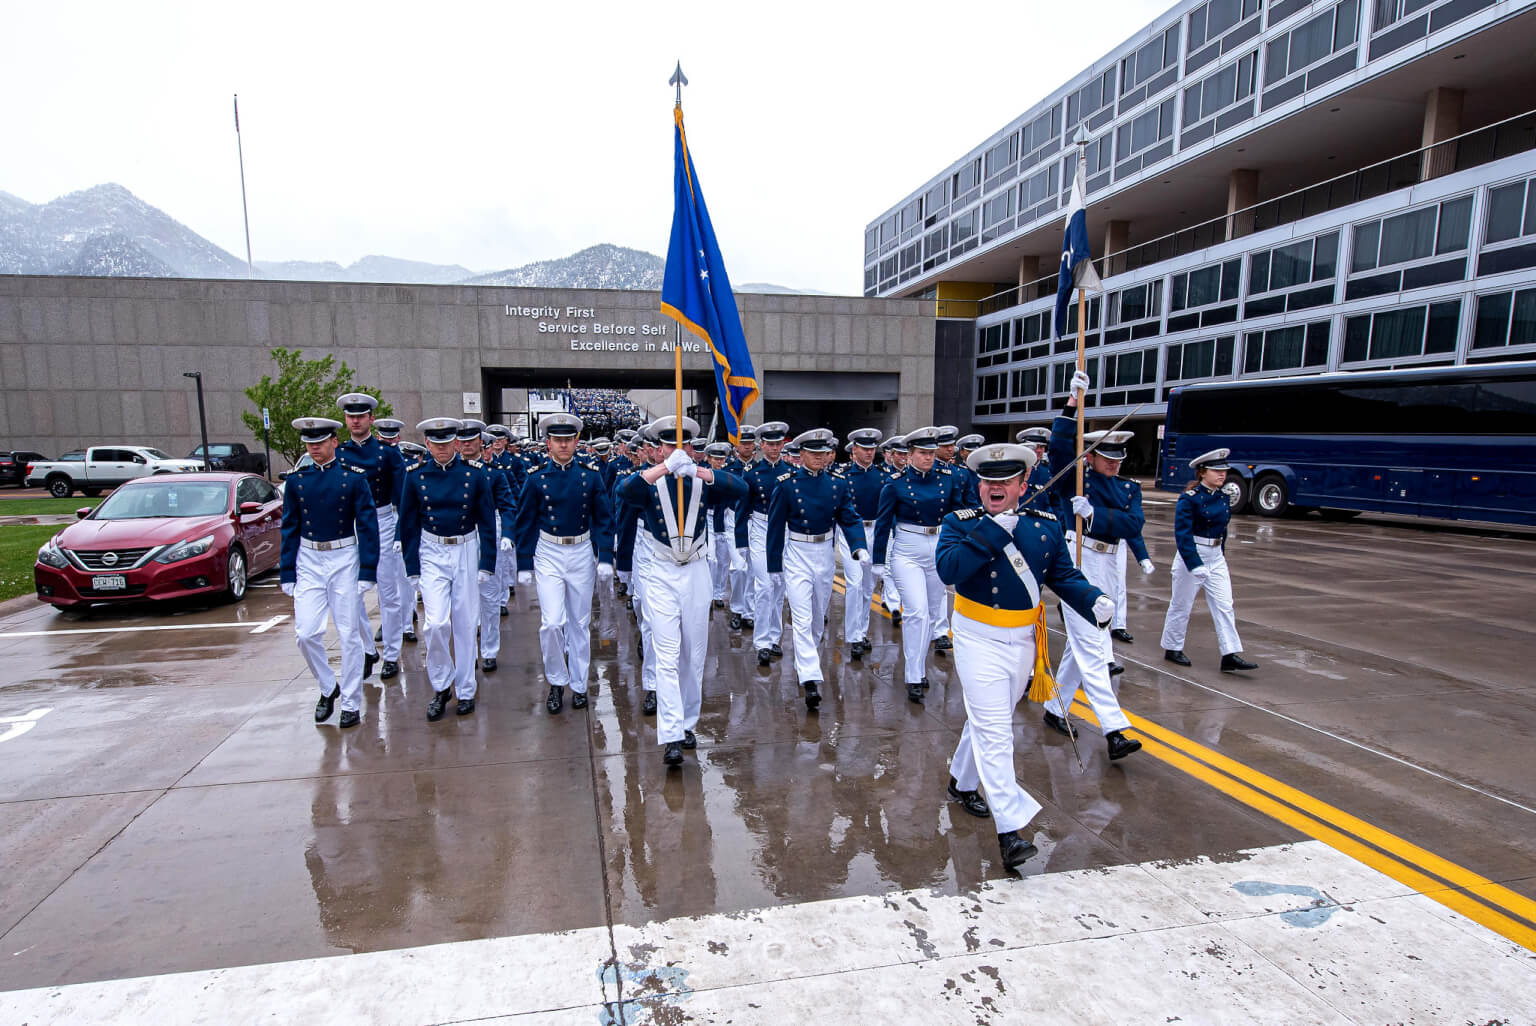 Cadets marching